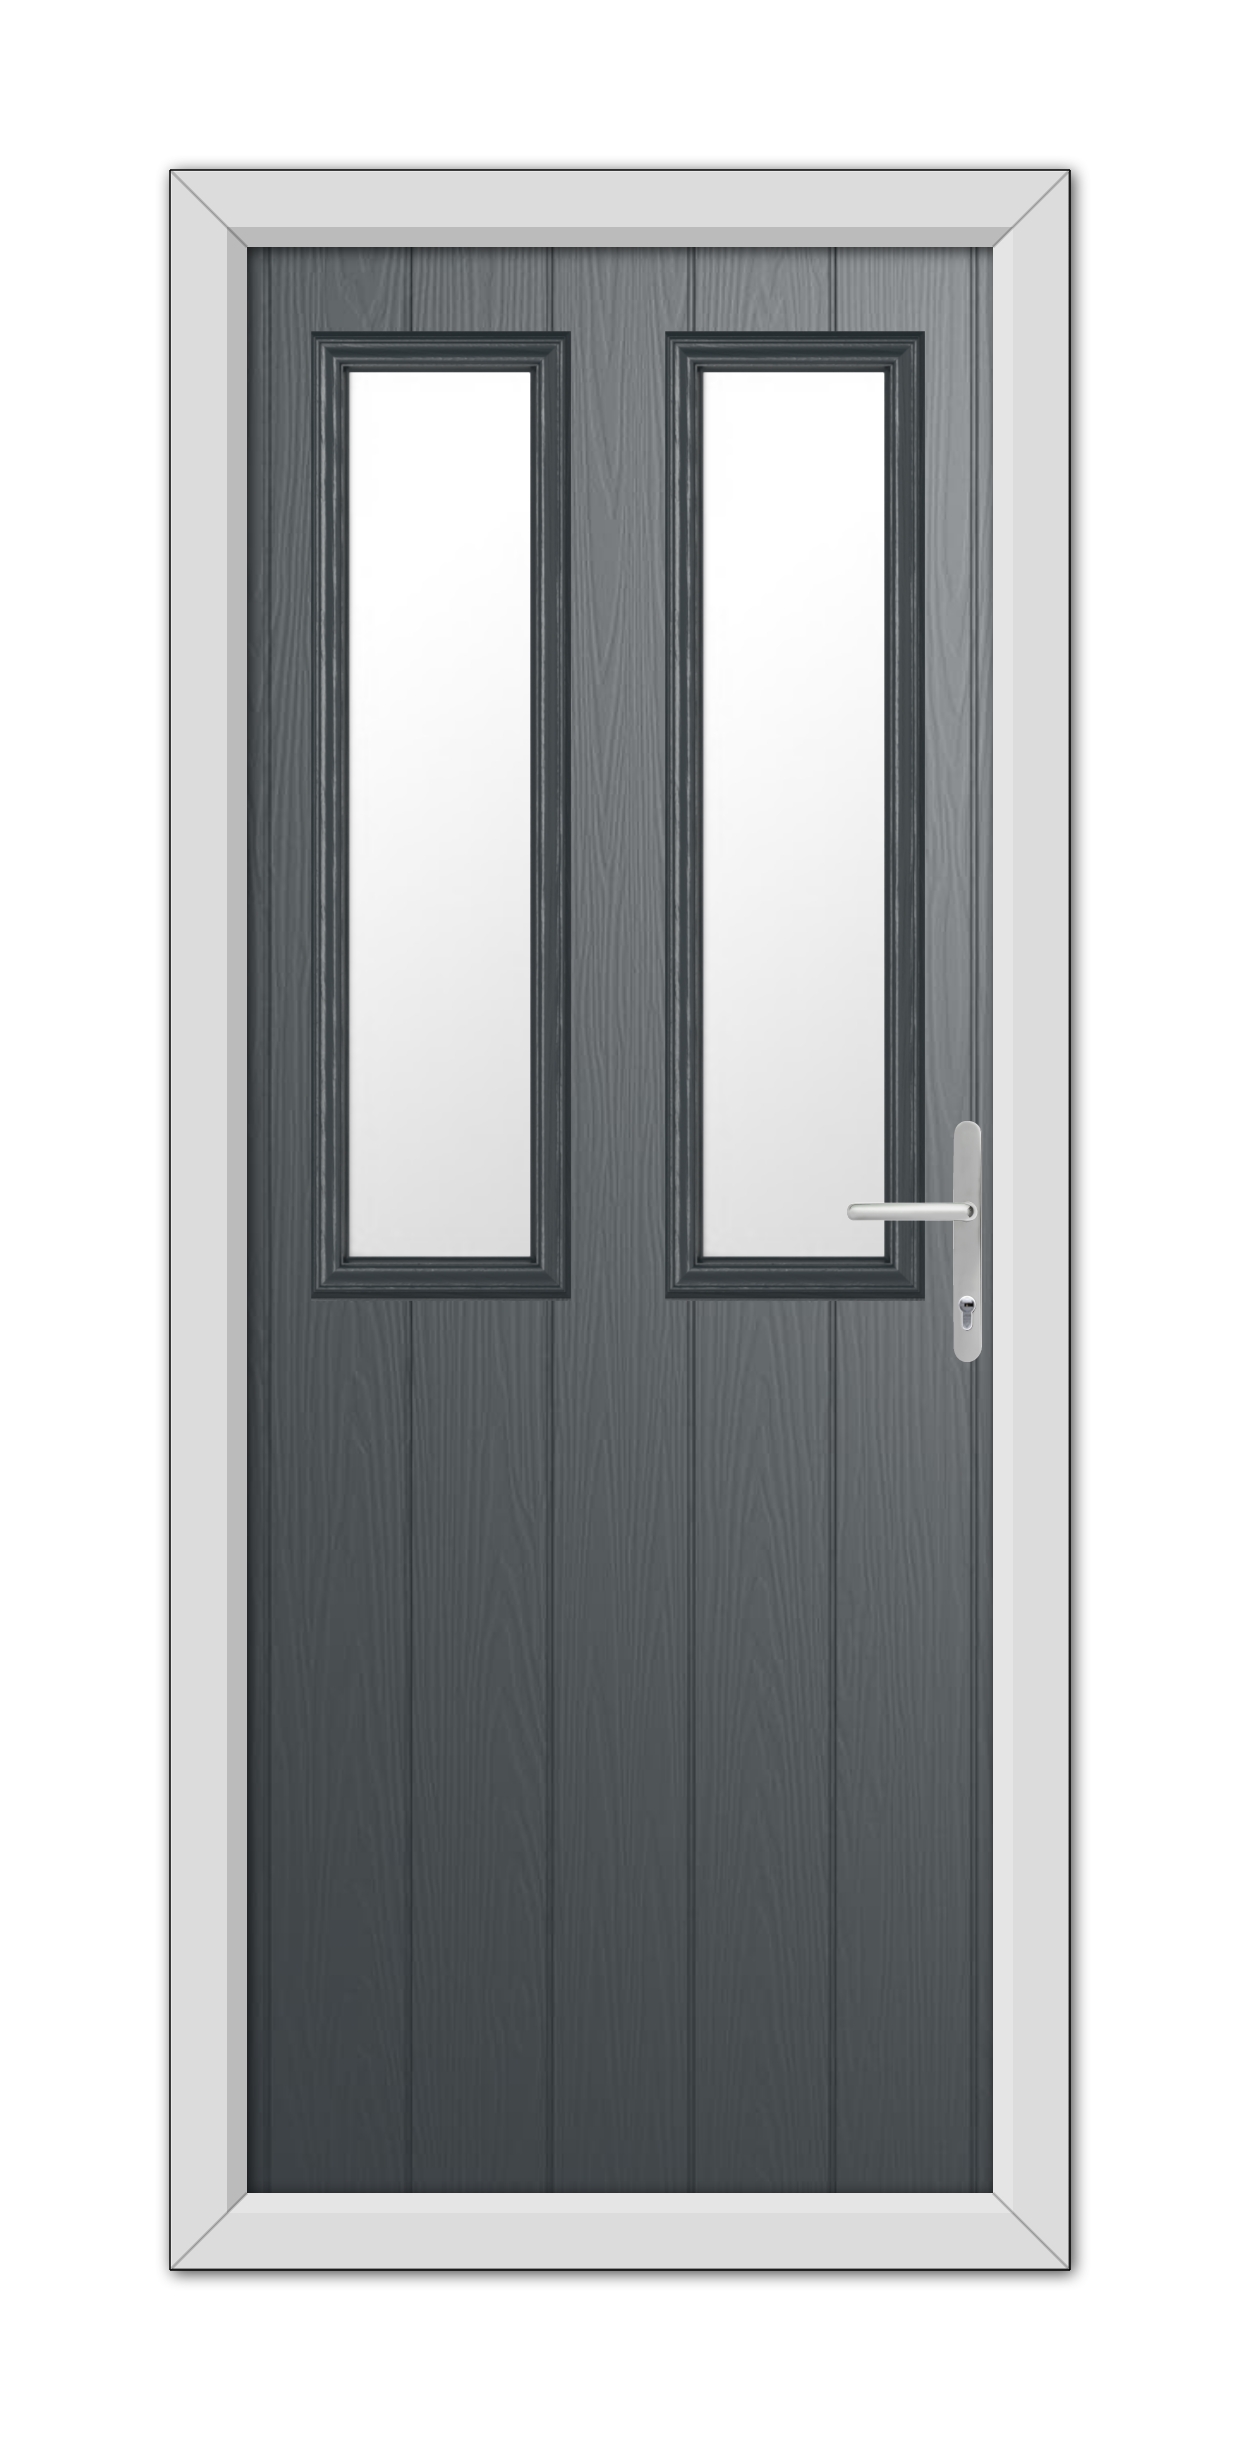 A modern anthracite grey double door with vertical rectangular glass panes and a silver handle, set within a white frame.